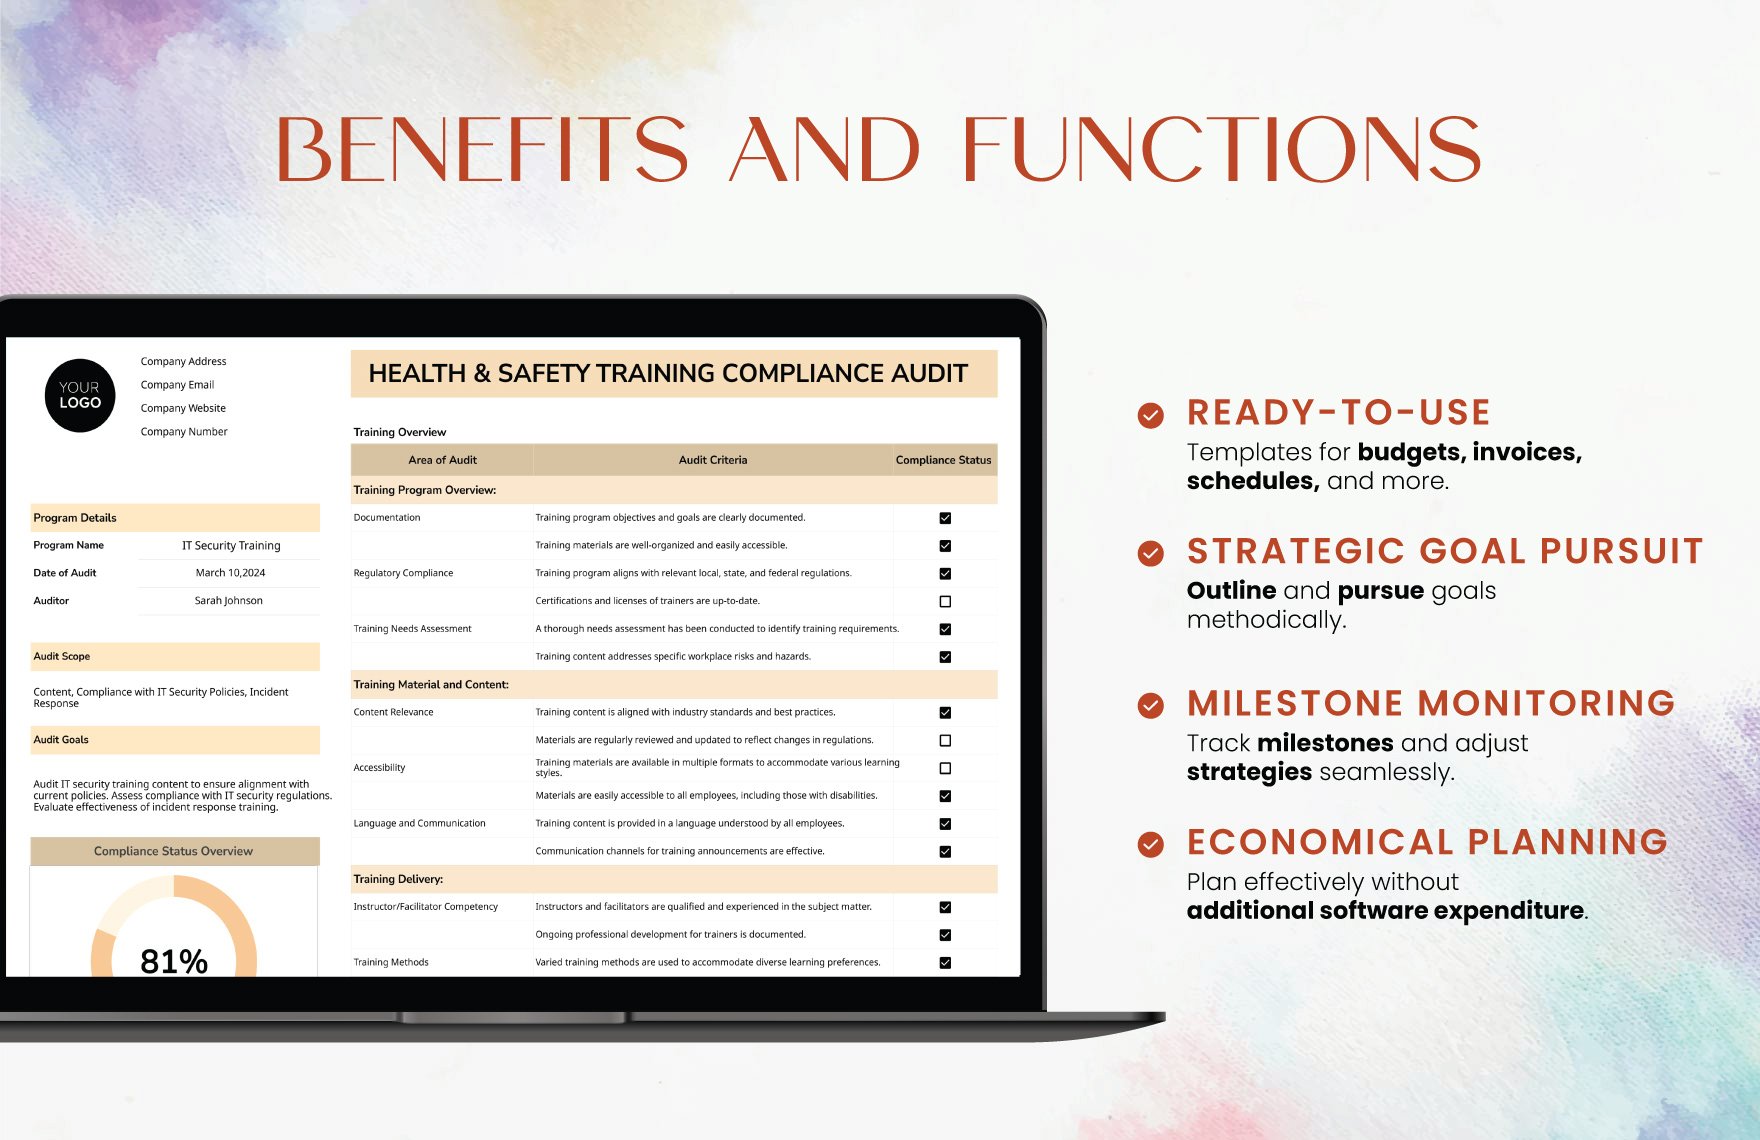 Health & Safety Training Compliance Audit Template